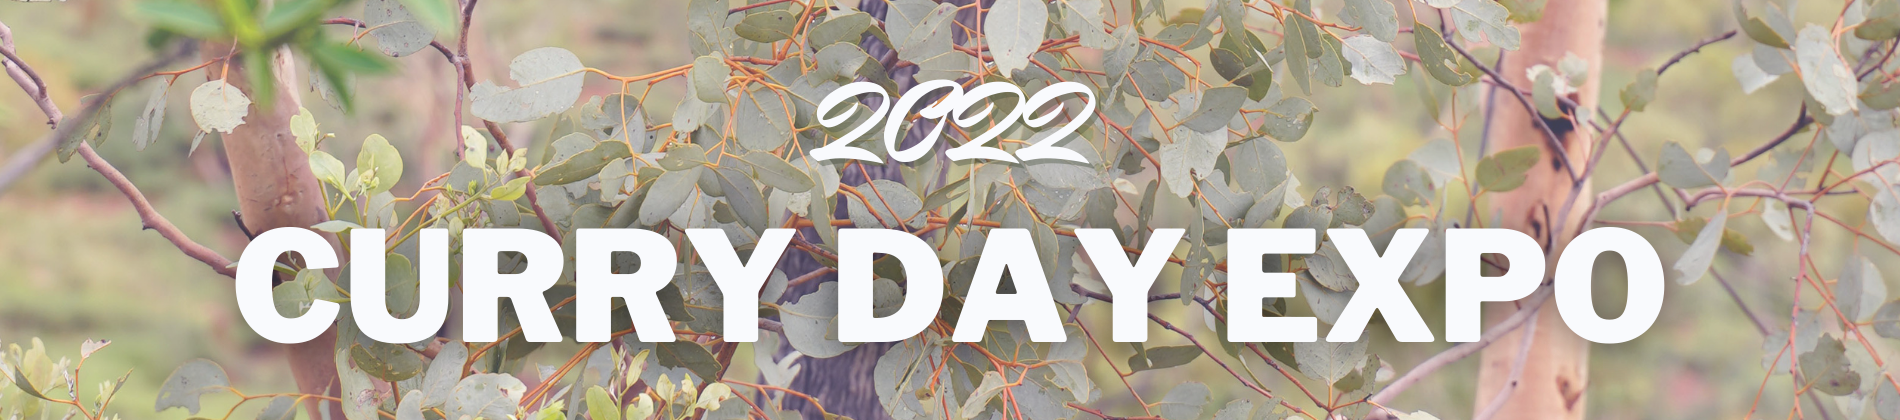 2022 Curry Day website banner